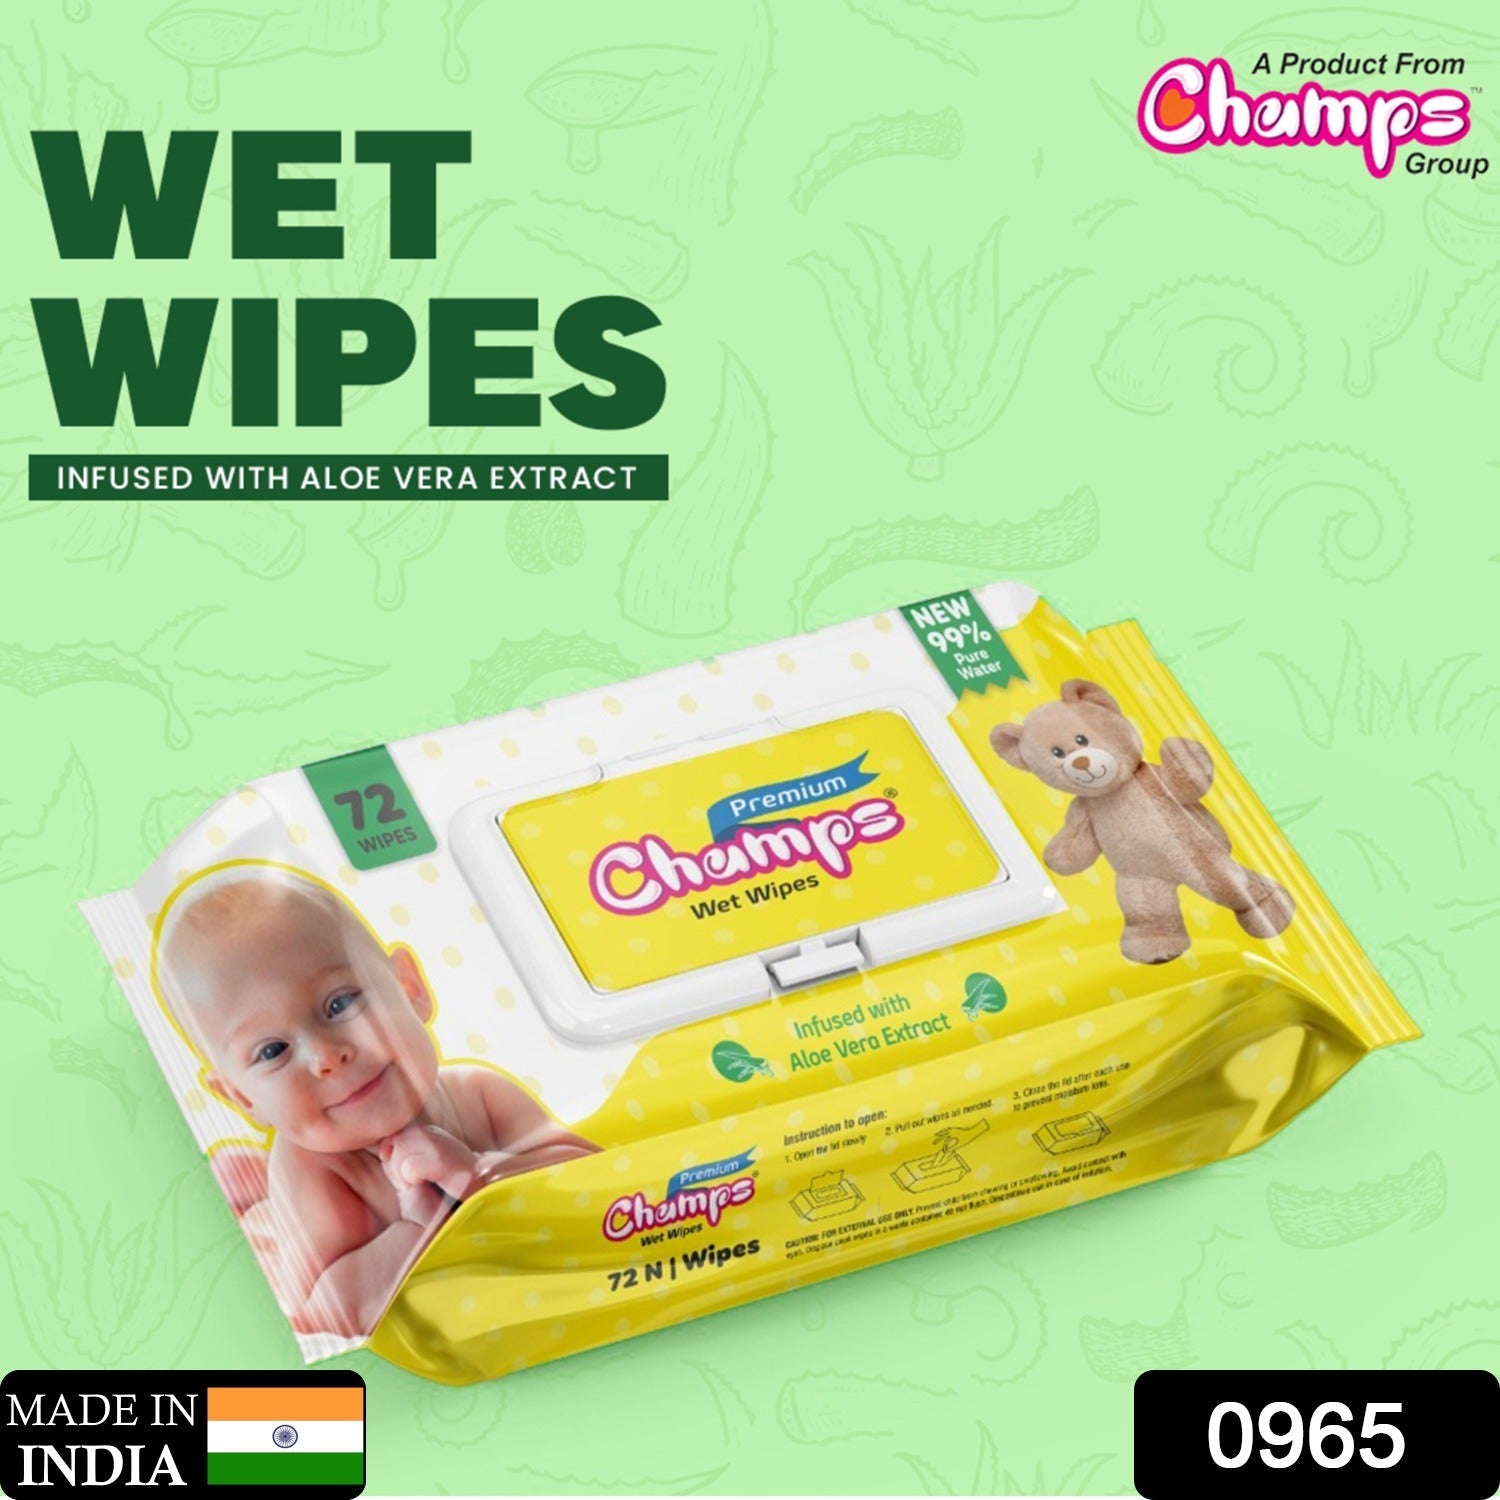 Champs Premium Wet Wipes Infused With Aloe Vera Extract Wet Wipes (72 N Wipes)